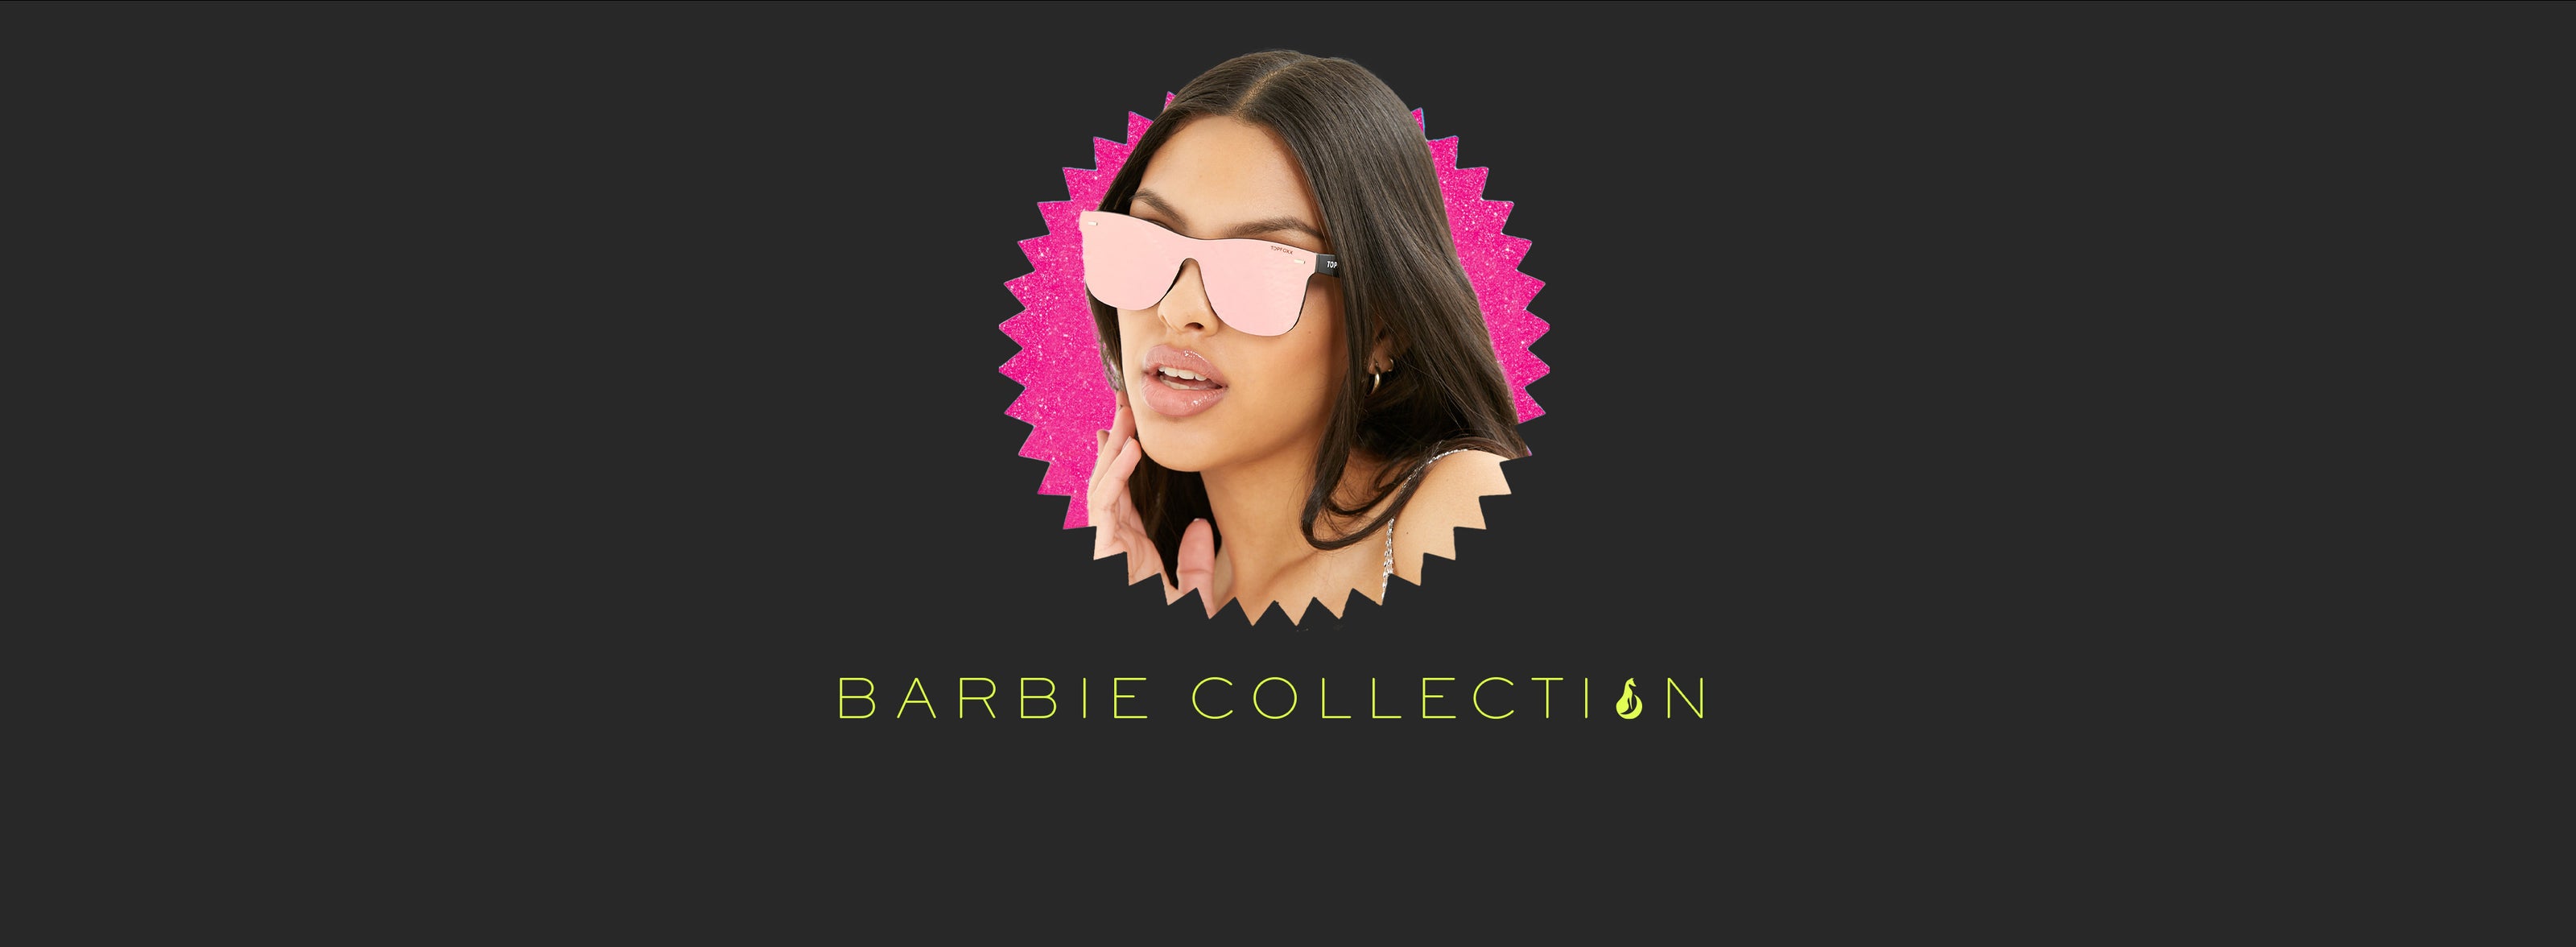 Barbie Sunglasses Collection